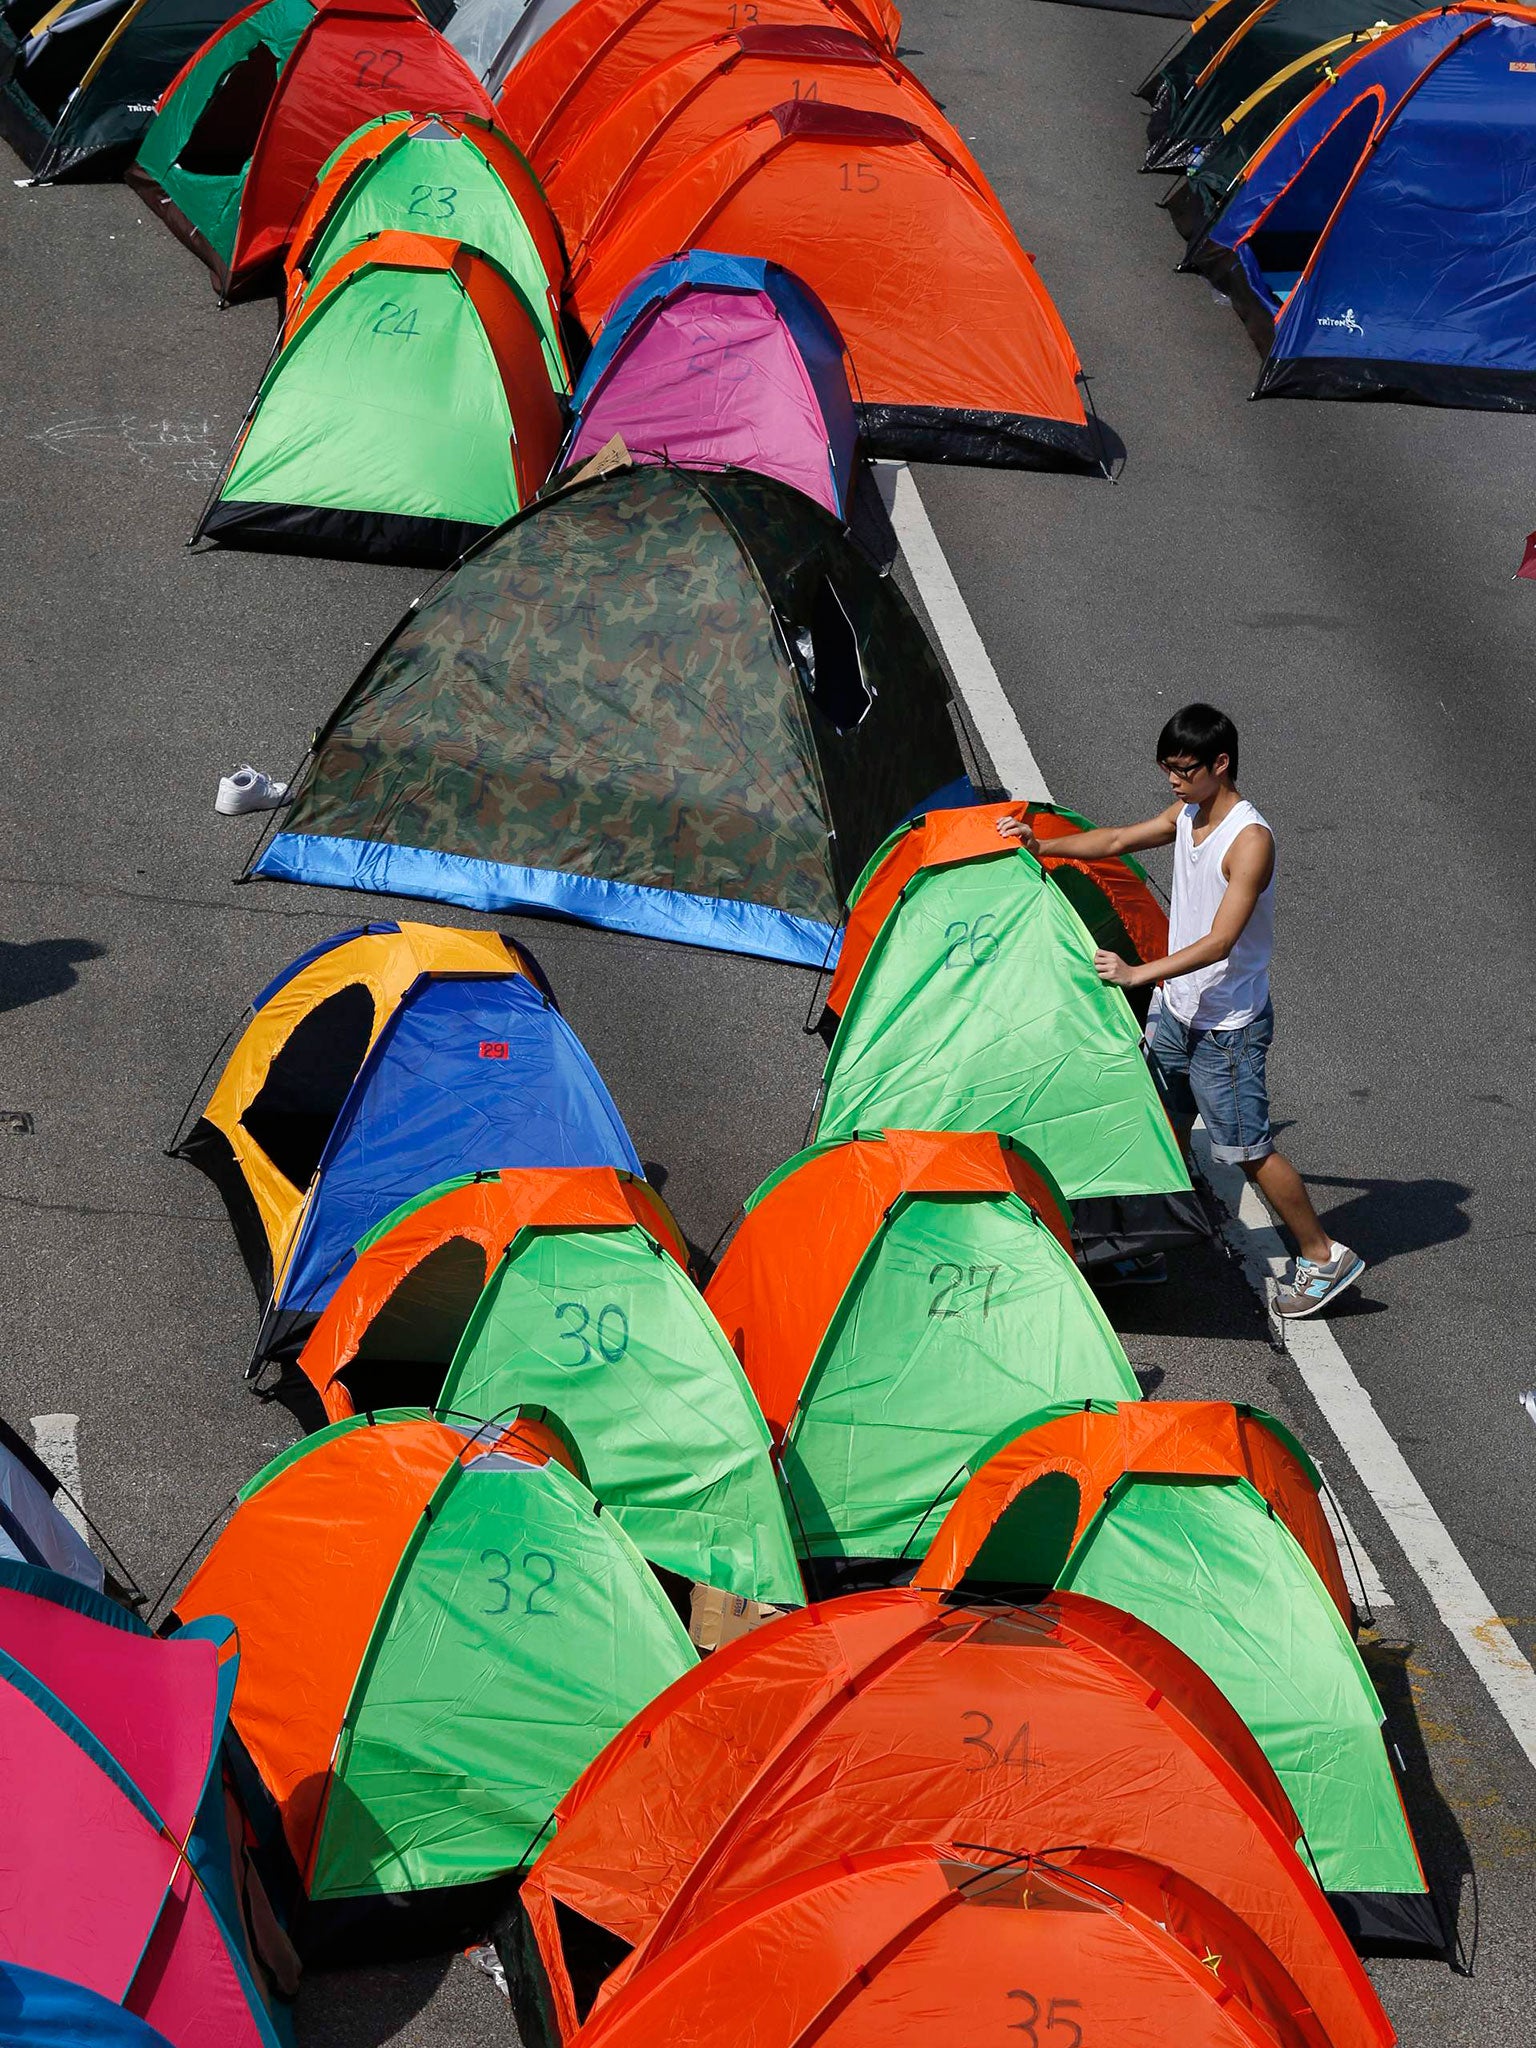 The Hong Kong government’s withdrawal from talks has galvanised protesters